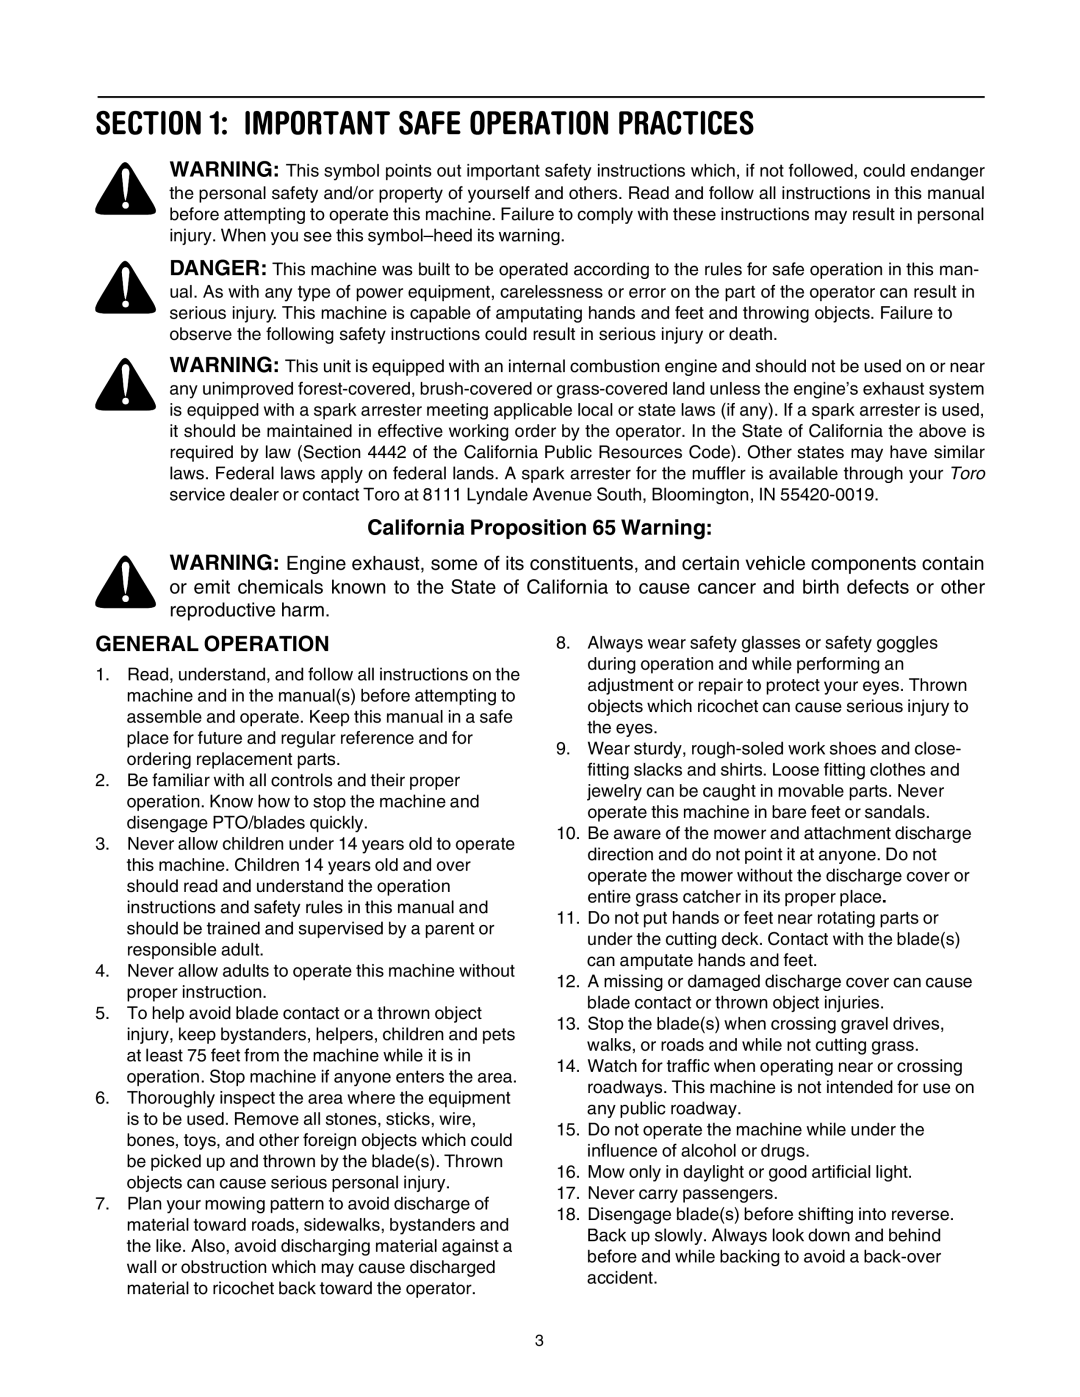 Toro LX500 manual Important Safe Operation Practices, California Proposition 65 Warning, General Operation 